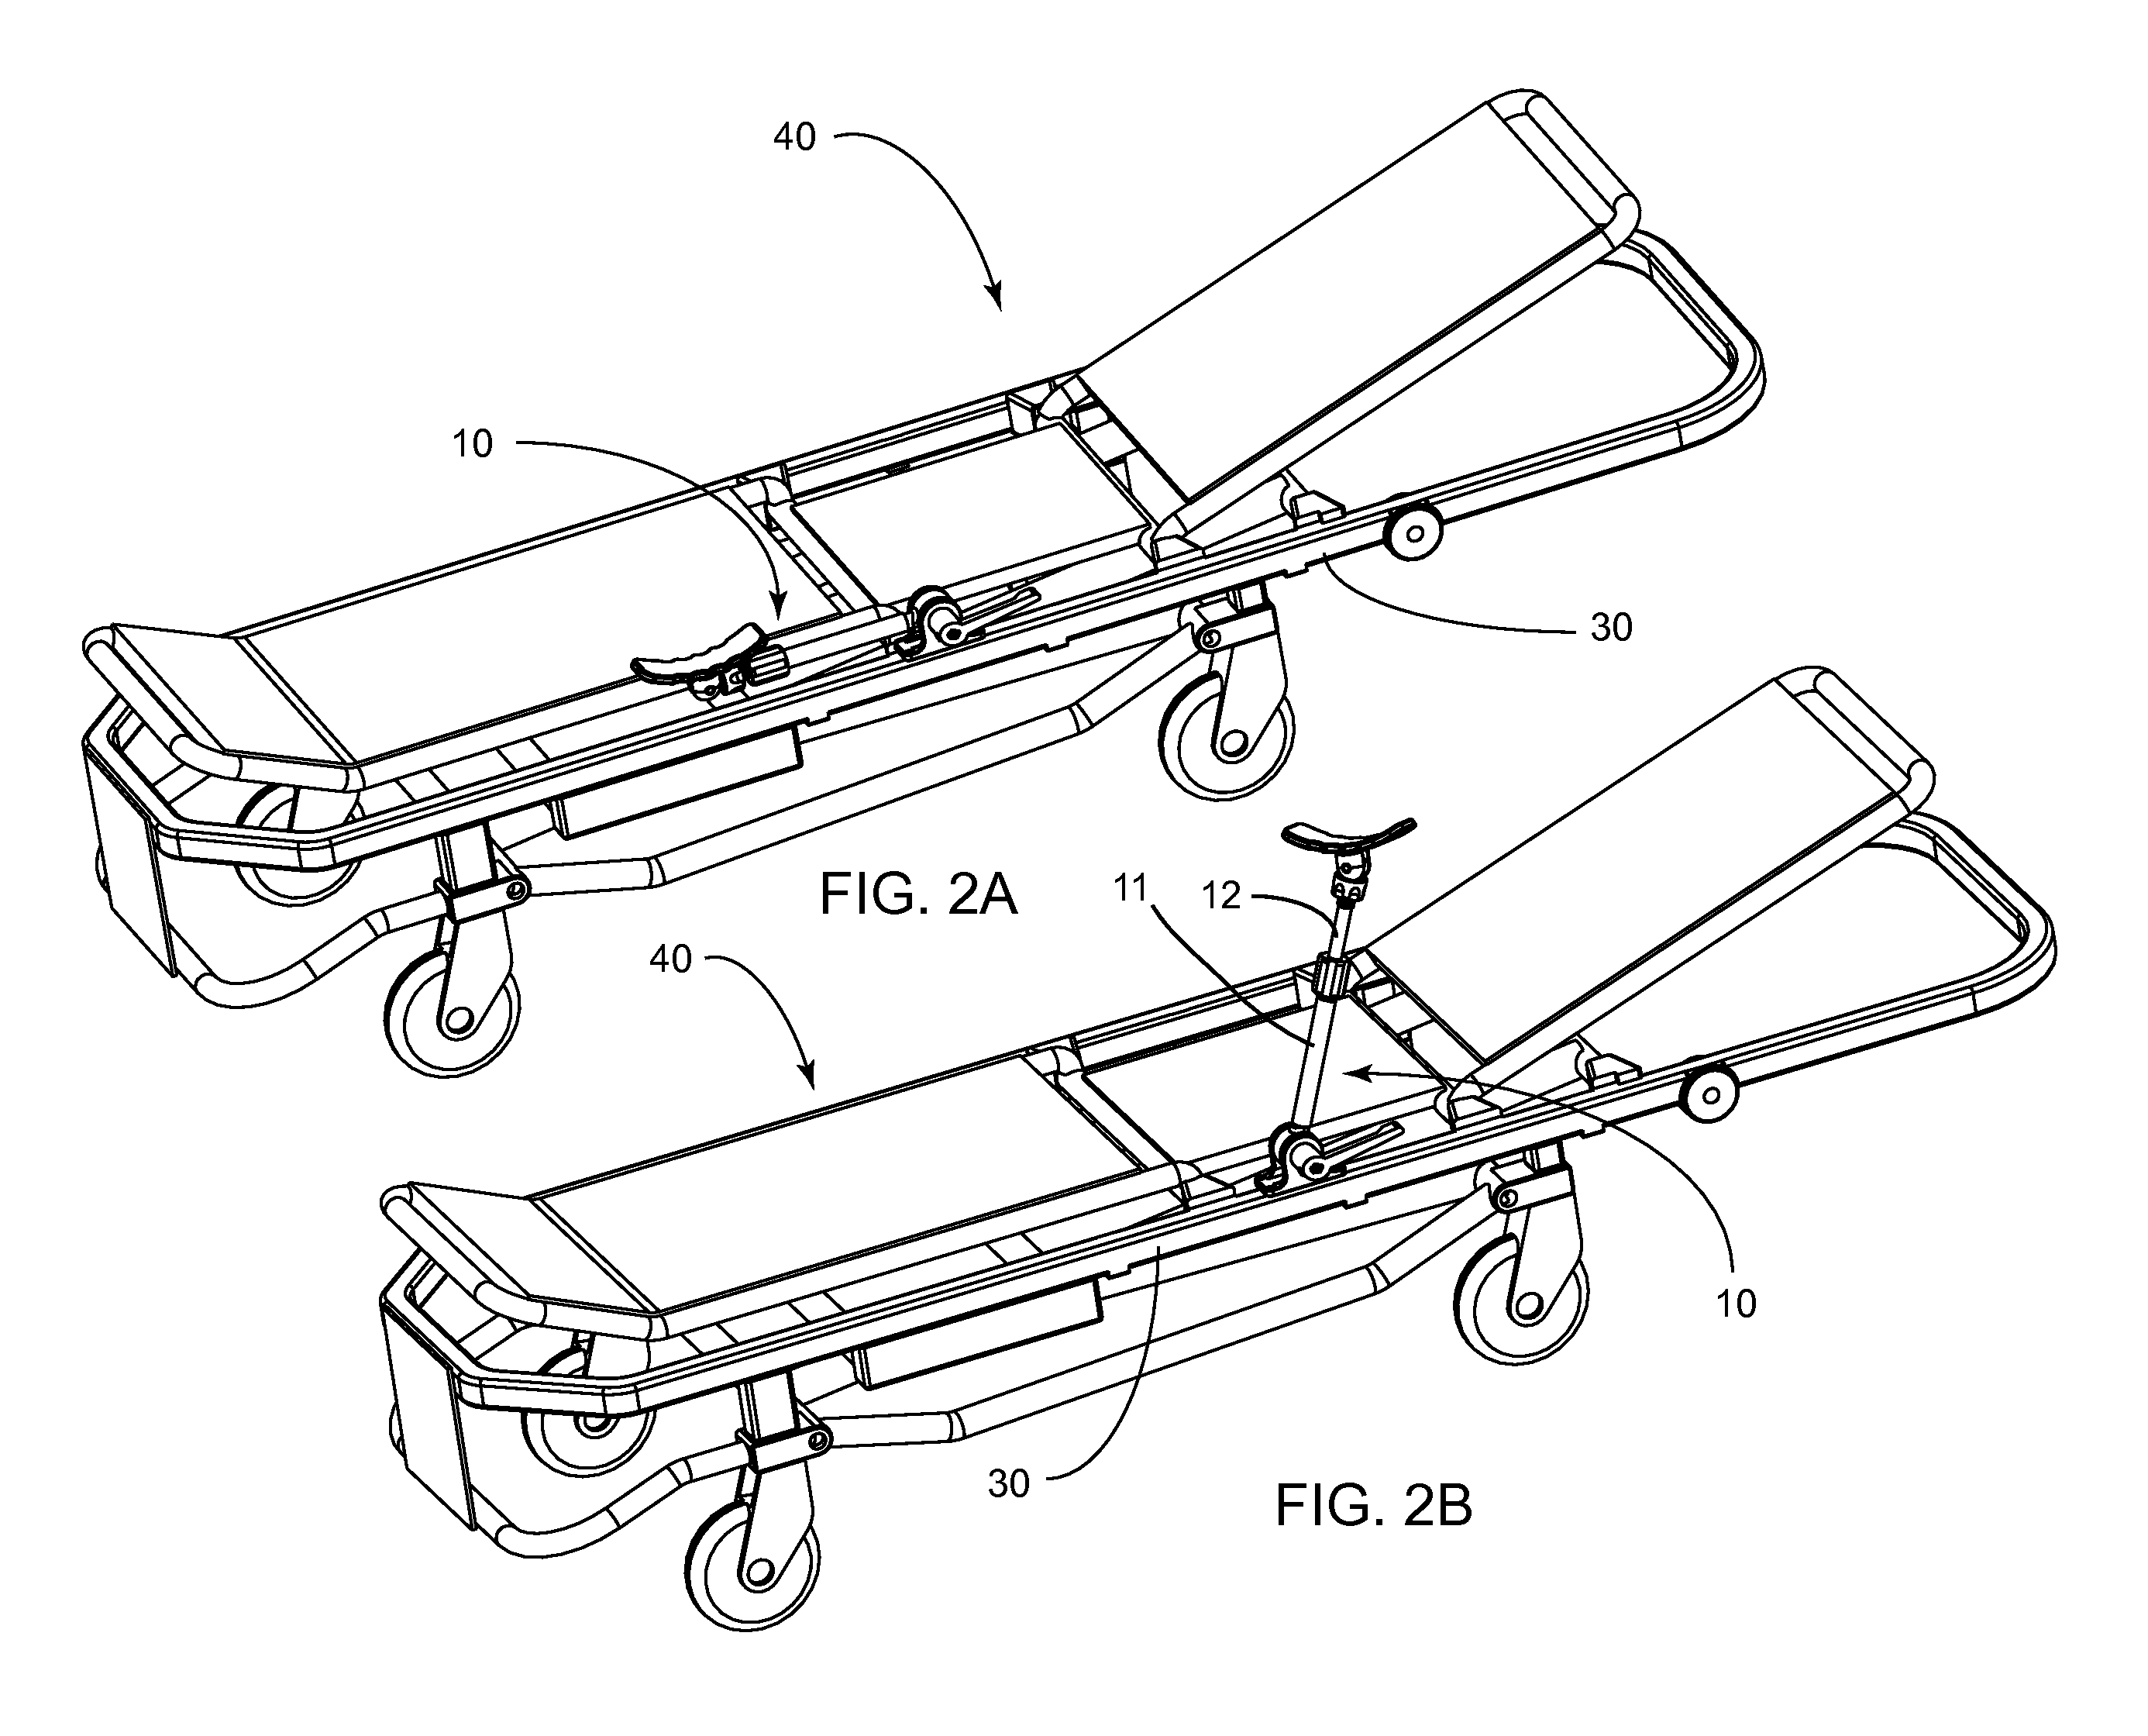 Extremity support apparatus